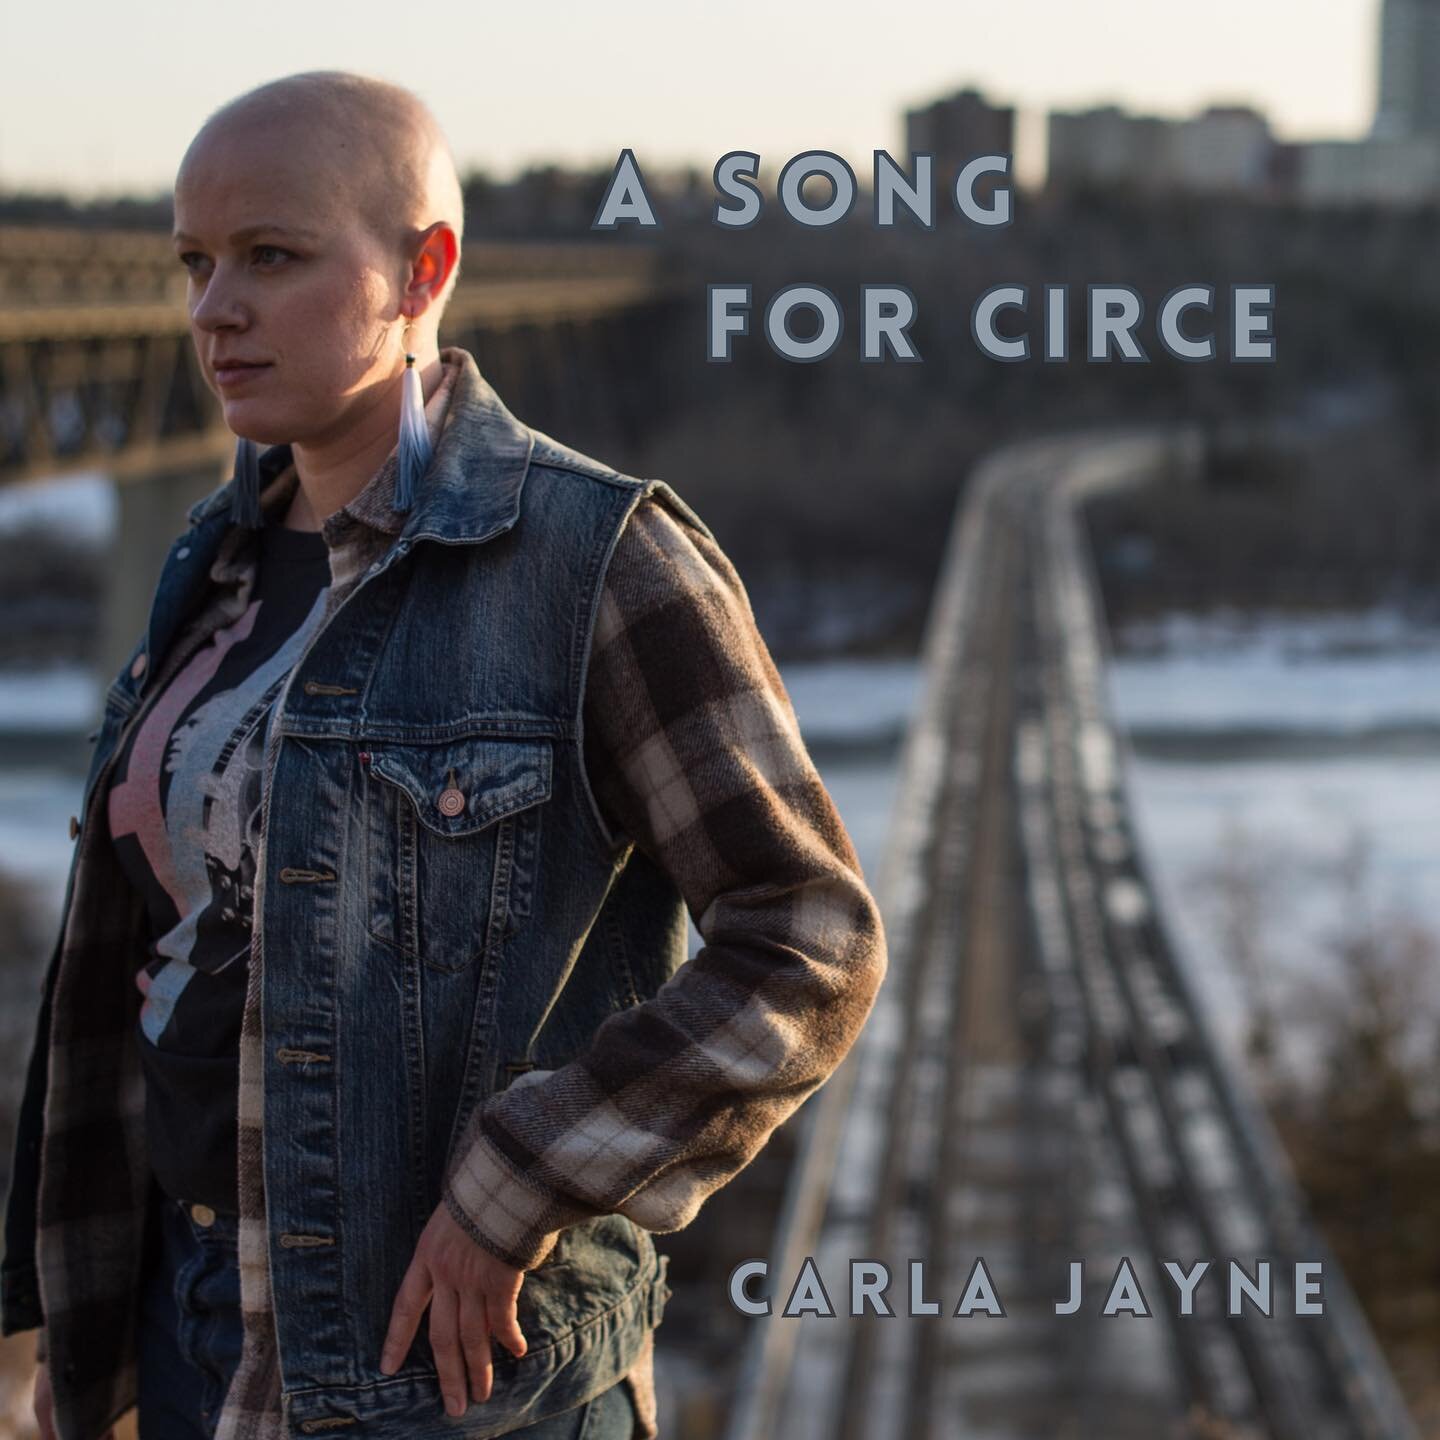 A Song for Circe is out now on all your local streaming platforms! 🙃🙂🙃

This tune was inspired by a @madeline.e.miller novel based on the Greek myth of Circe, a Titan&rsquo;s daughter banished for turning someone into a sea monster. WHO HASN&rsquo